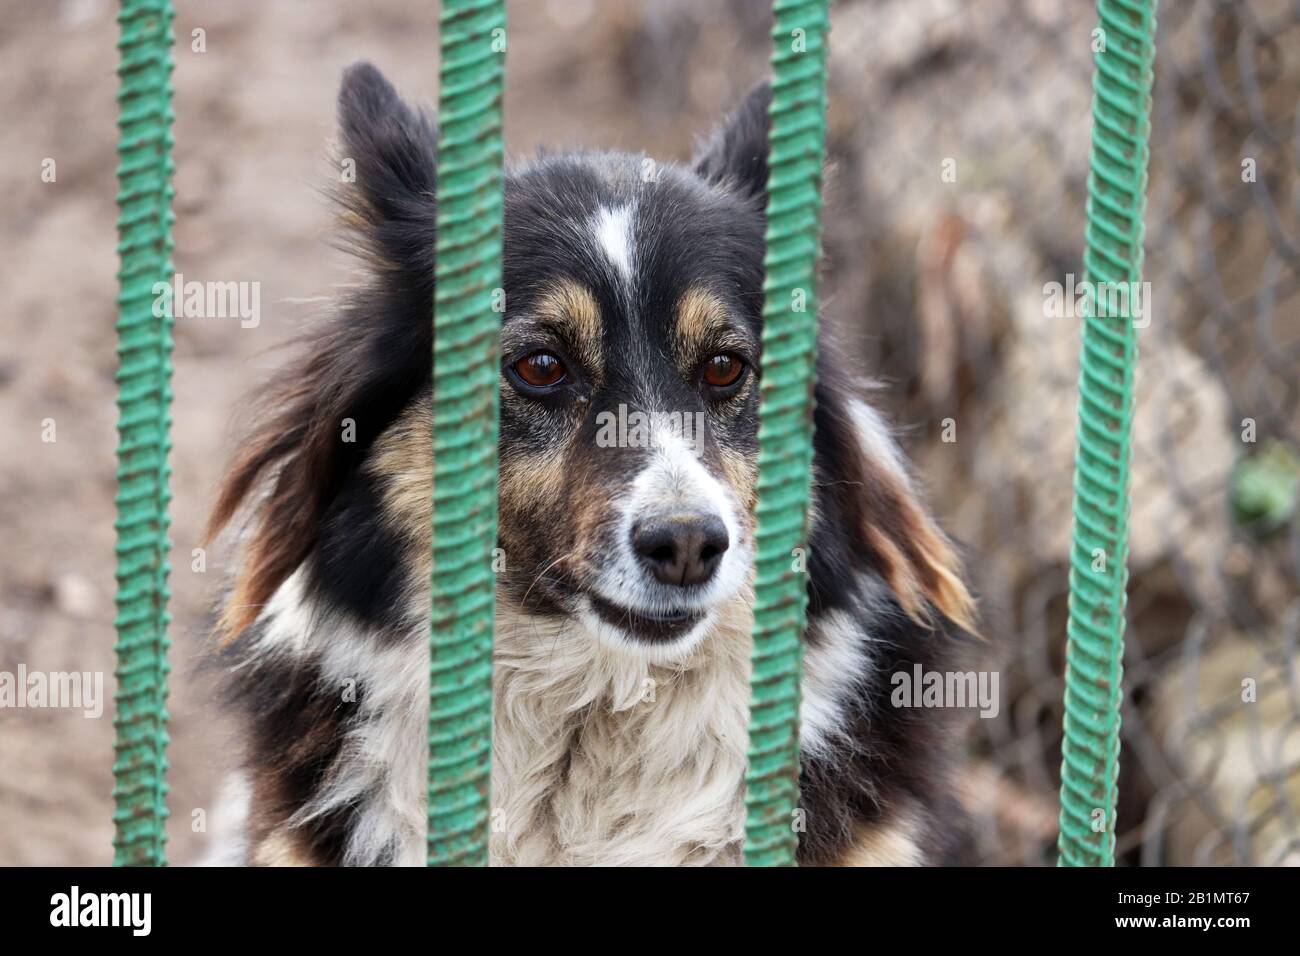 Dog standing behind a metal fence in a yard. Home security or dog shelter concept Stock Photo